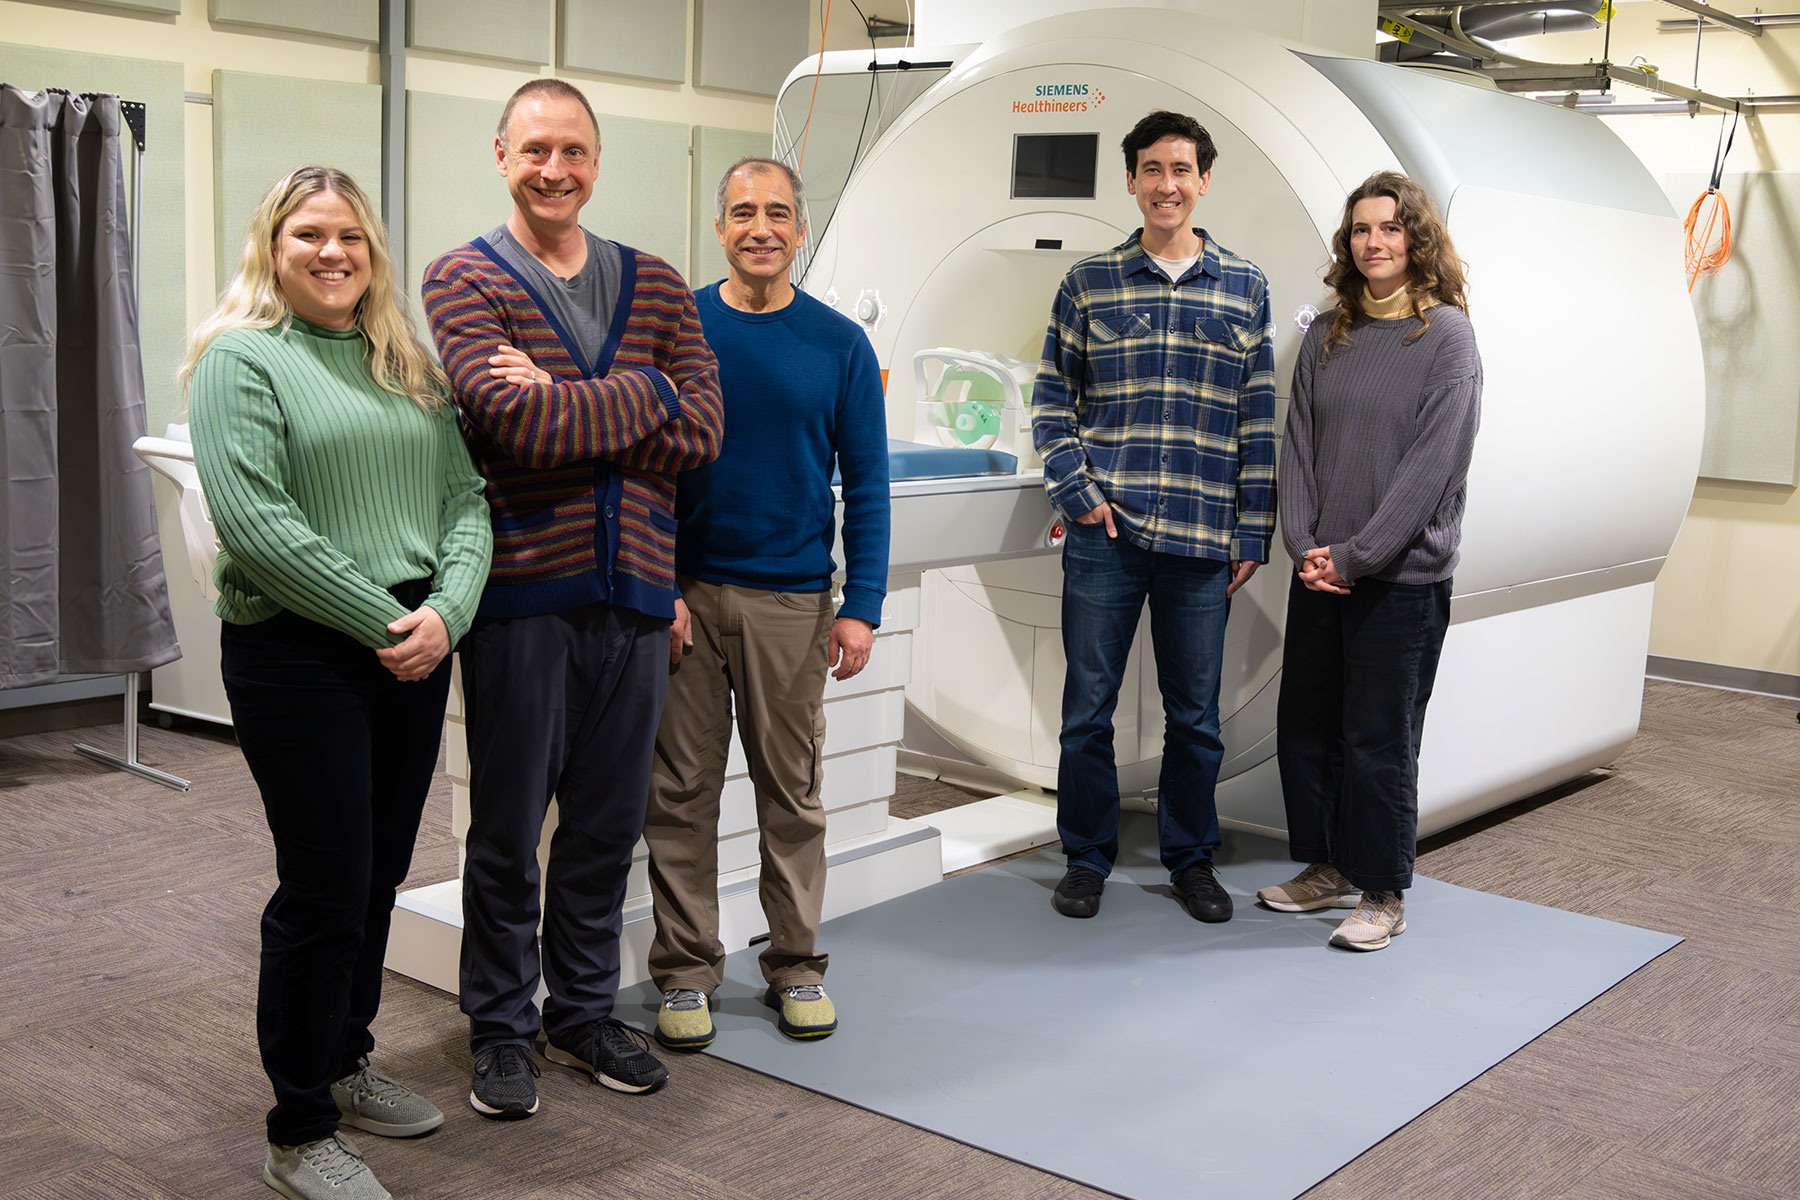 Five people stand in front of an MRI machine